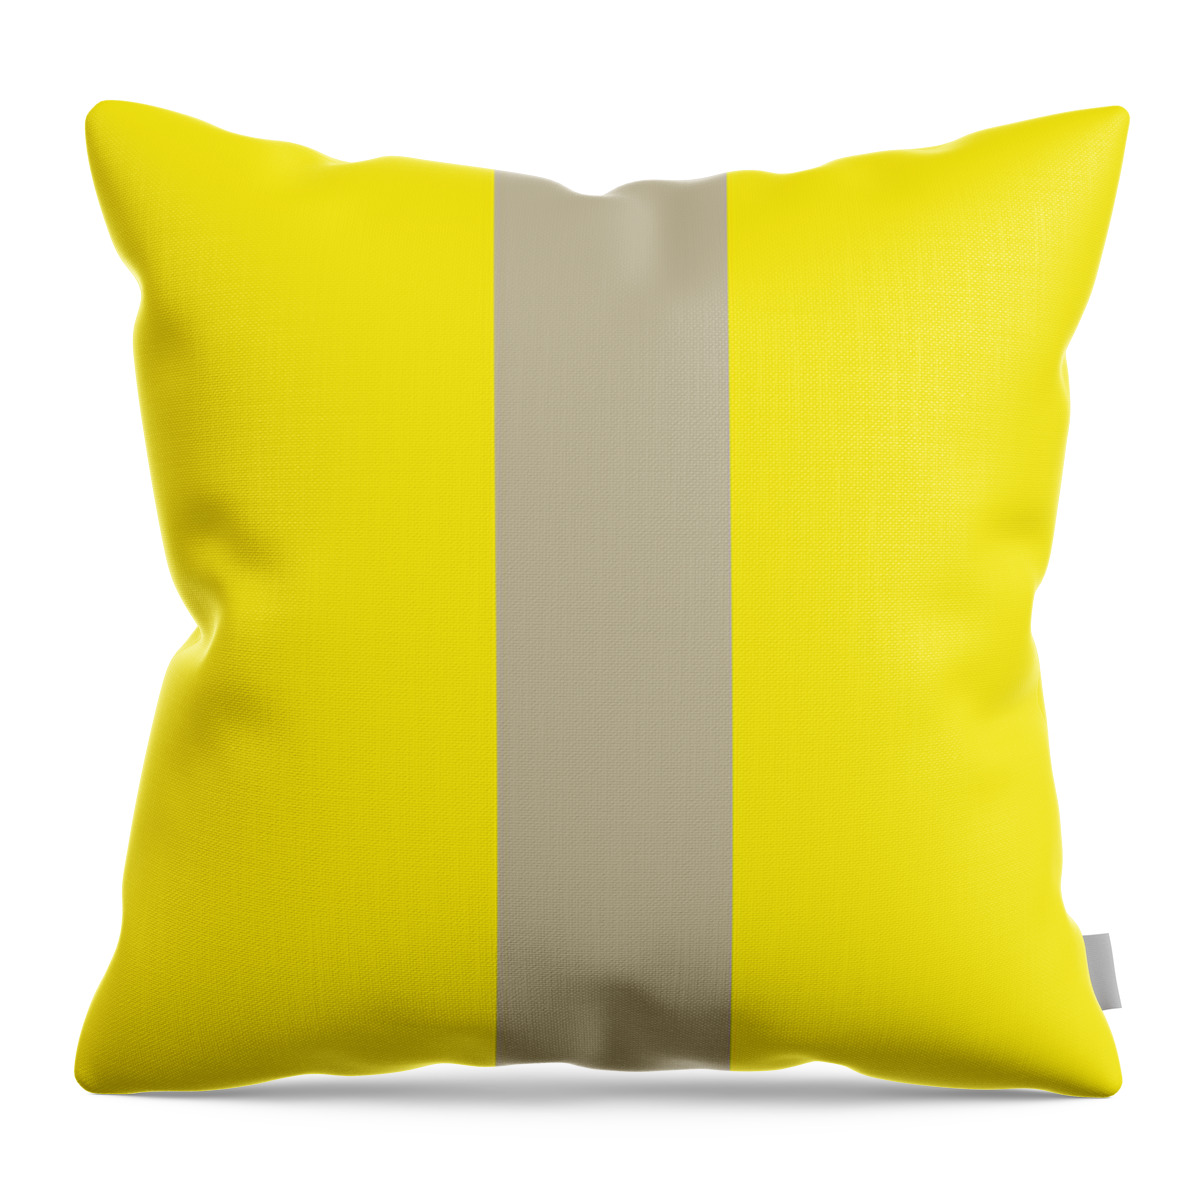 Abstract Throw Pillow featuring the digital art Nool by Naxart Studio